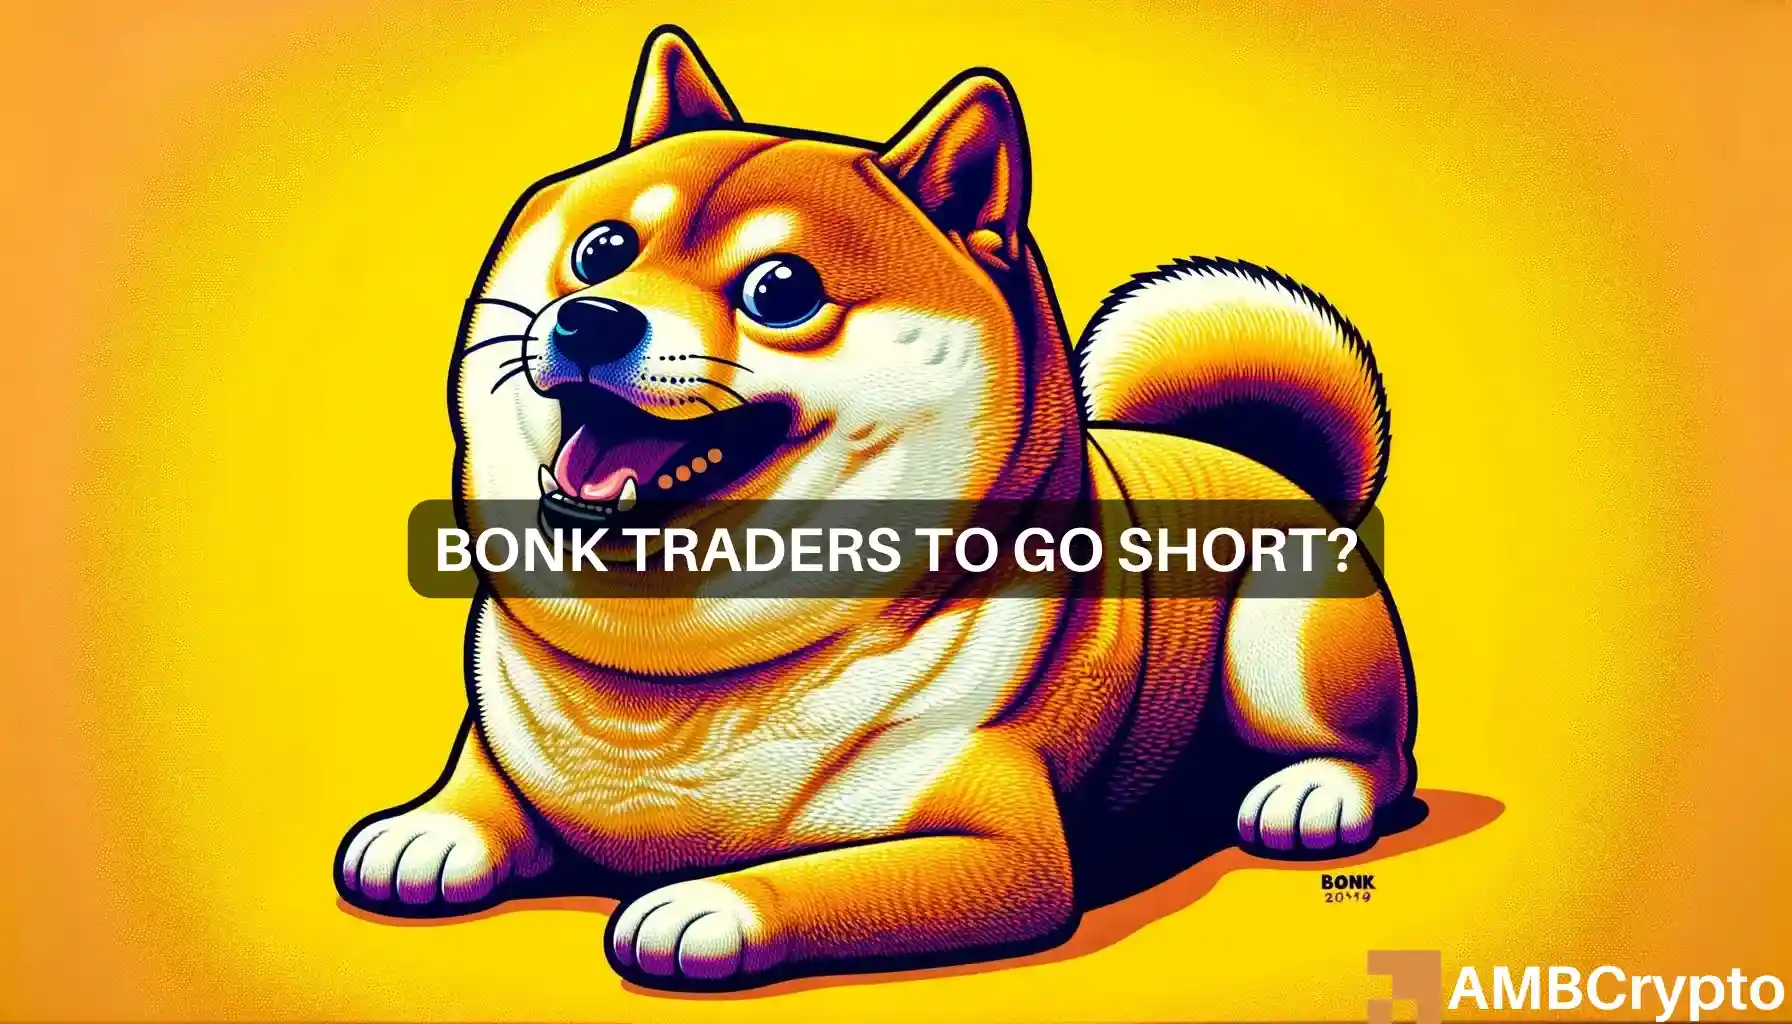 BONK price prediction: A 30% bounce after a 15% drop?